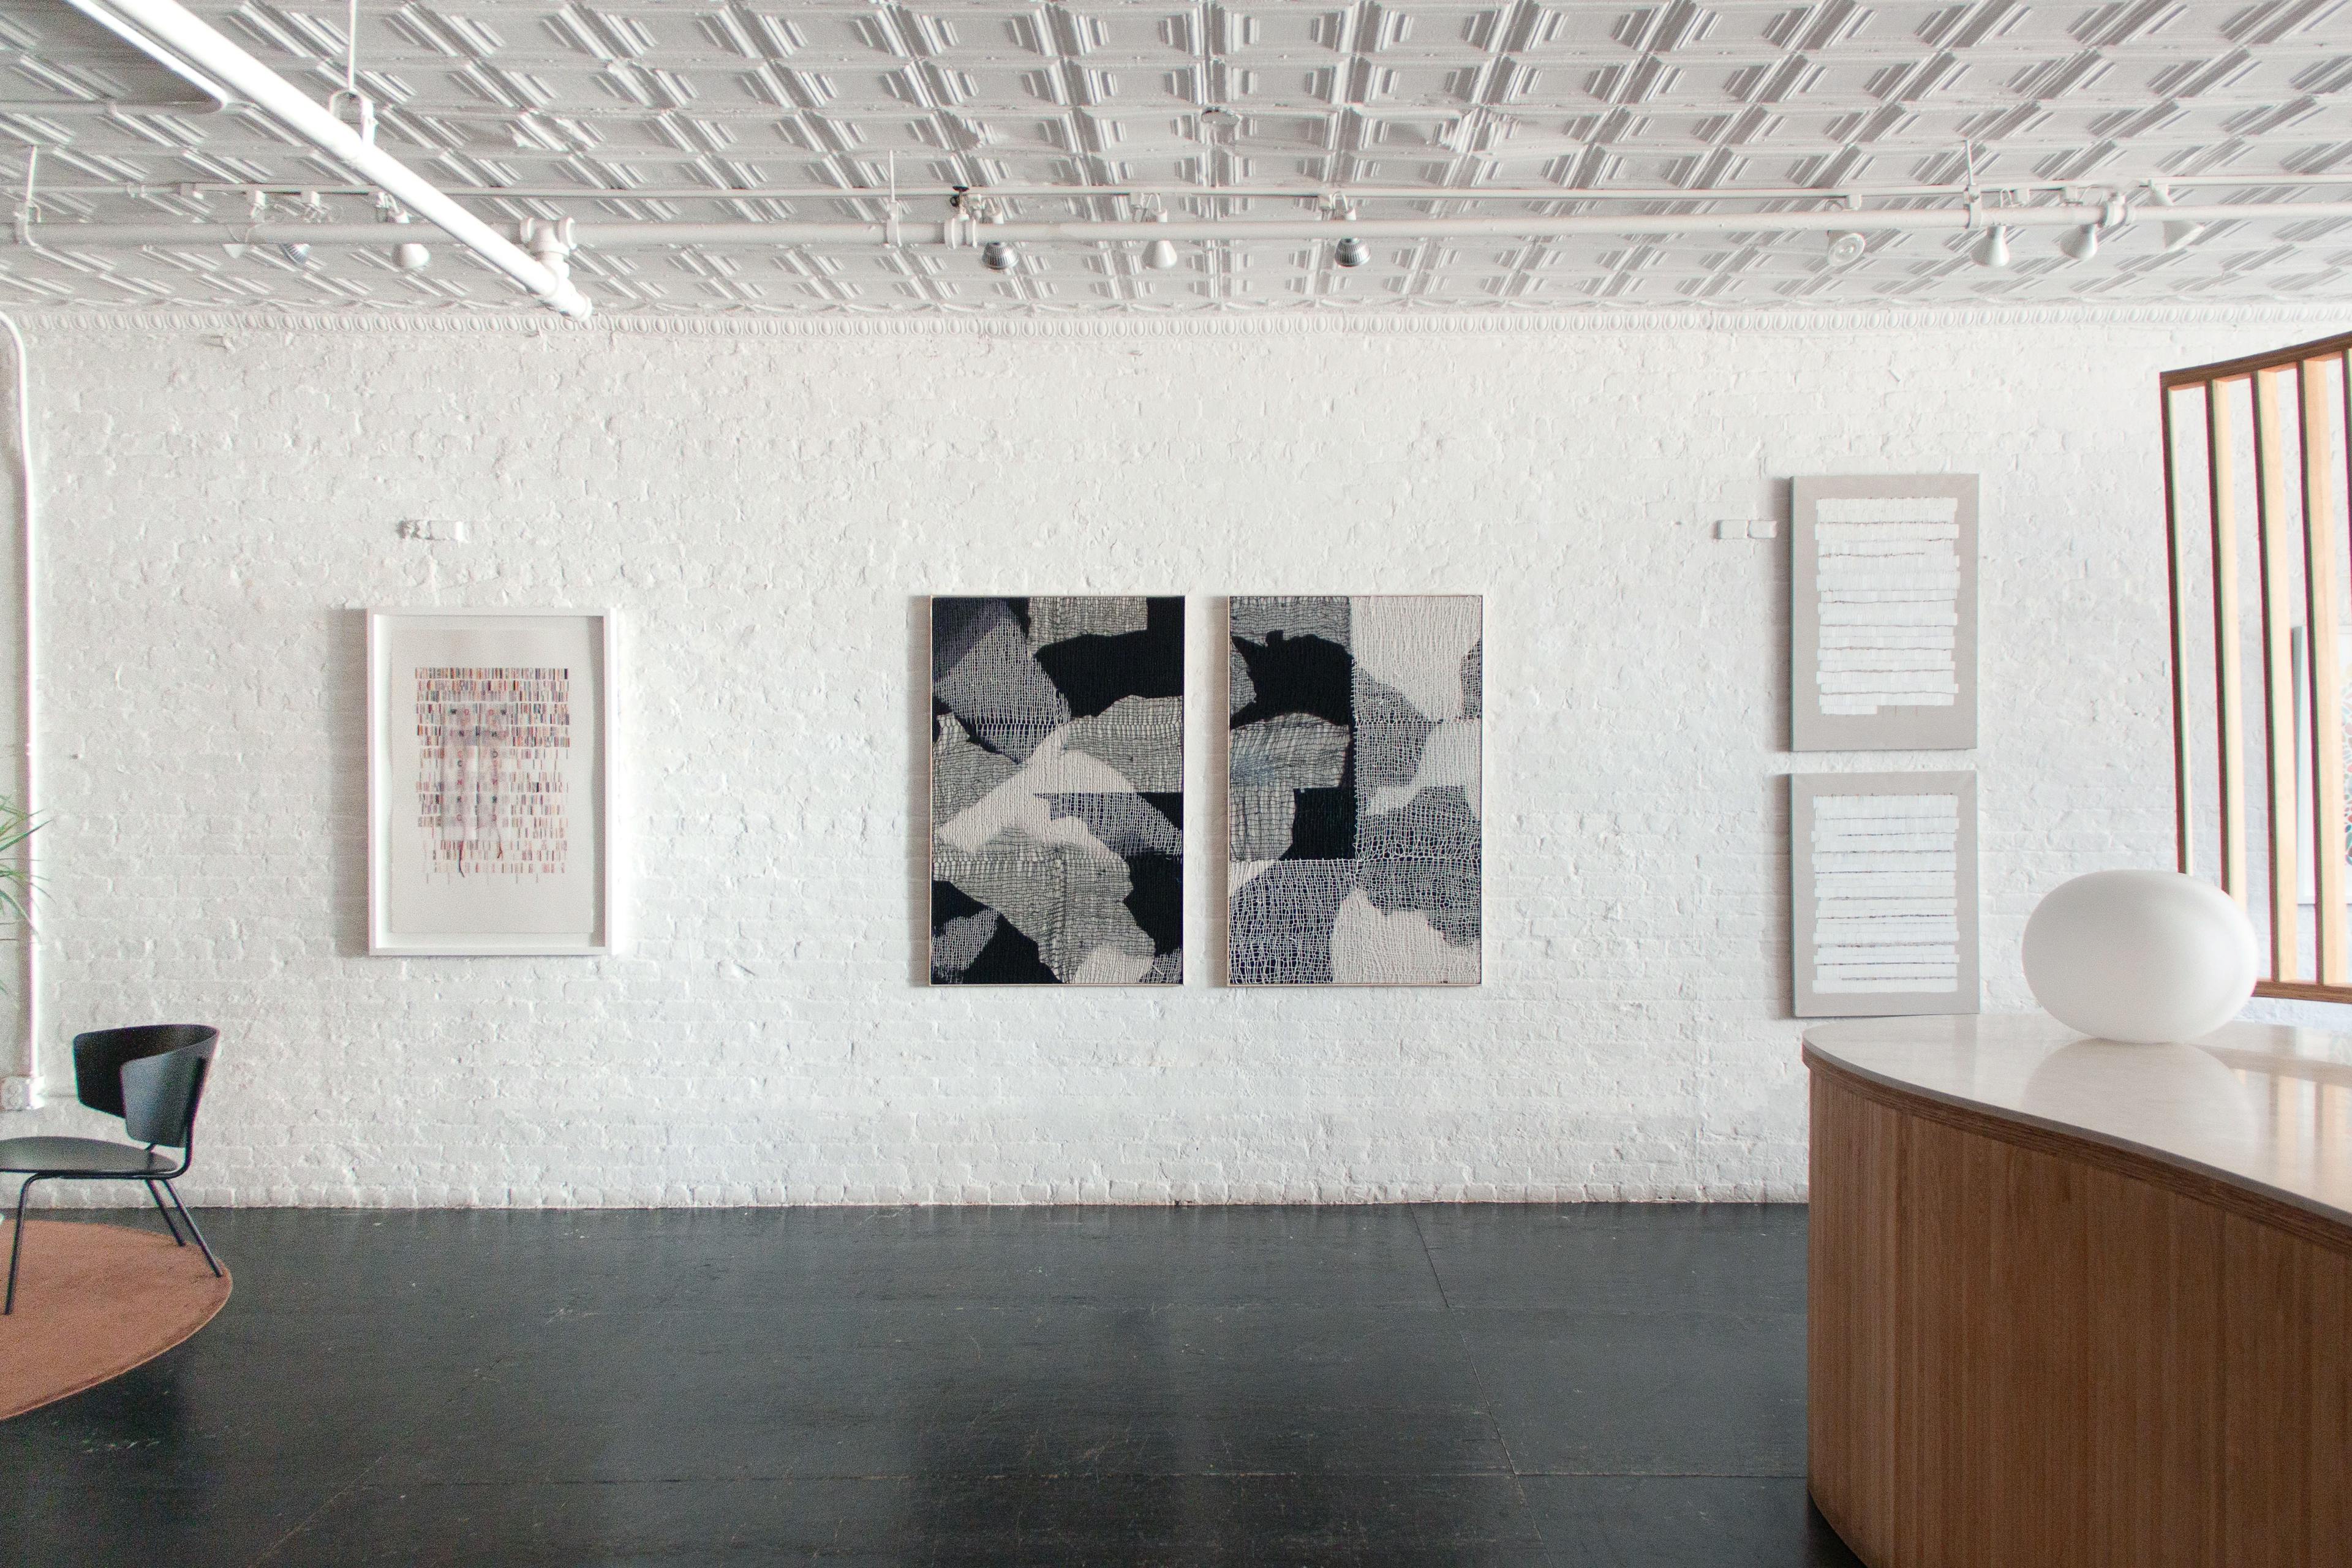 Artwork installed as part of Contexture, one of Uprise Art's Exhibitions in New York, NY.